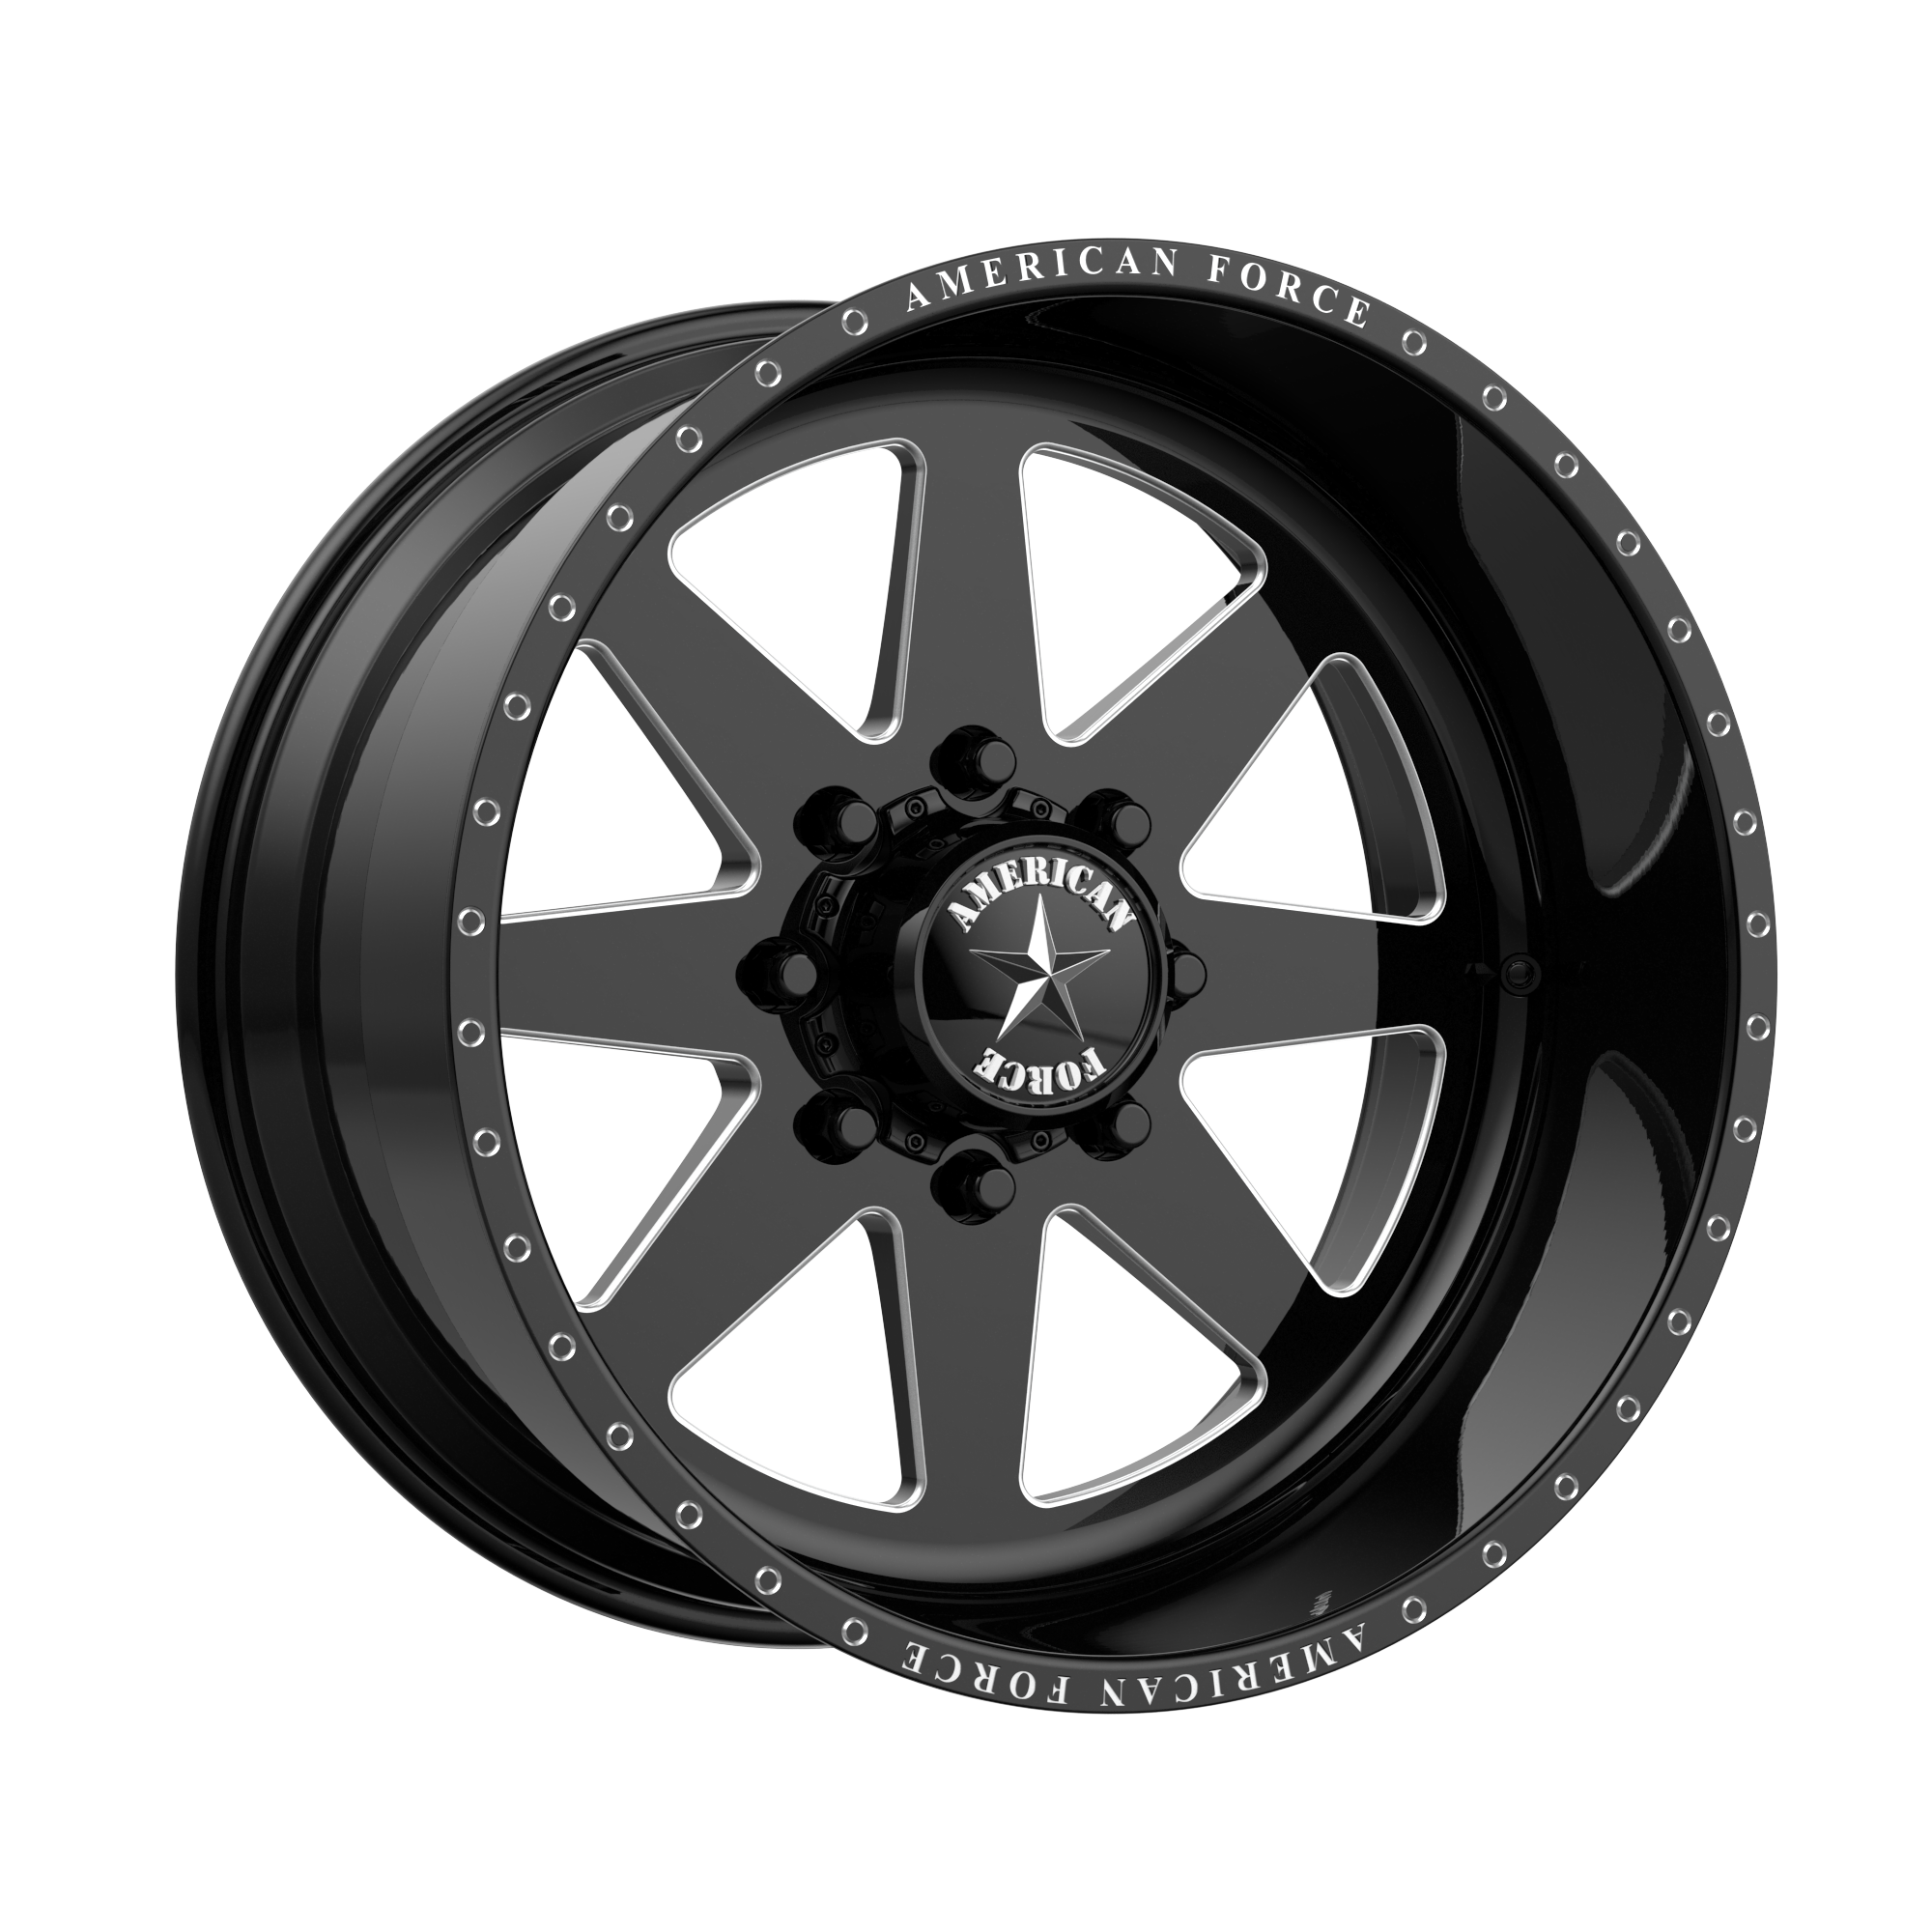 INDEPENDENCE SS 20x14 8x165.10 GLOSS BLACK MACHINED (-73 mm) - Tires and Engine Performance